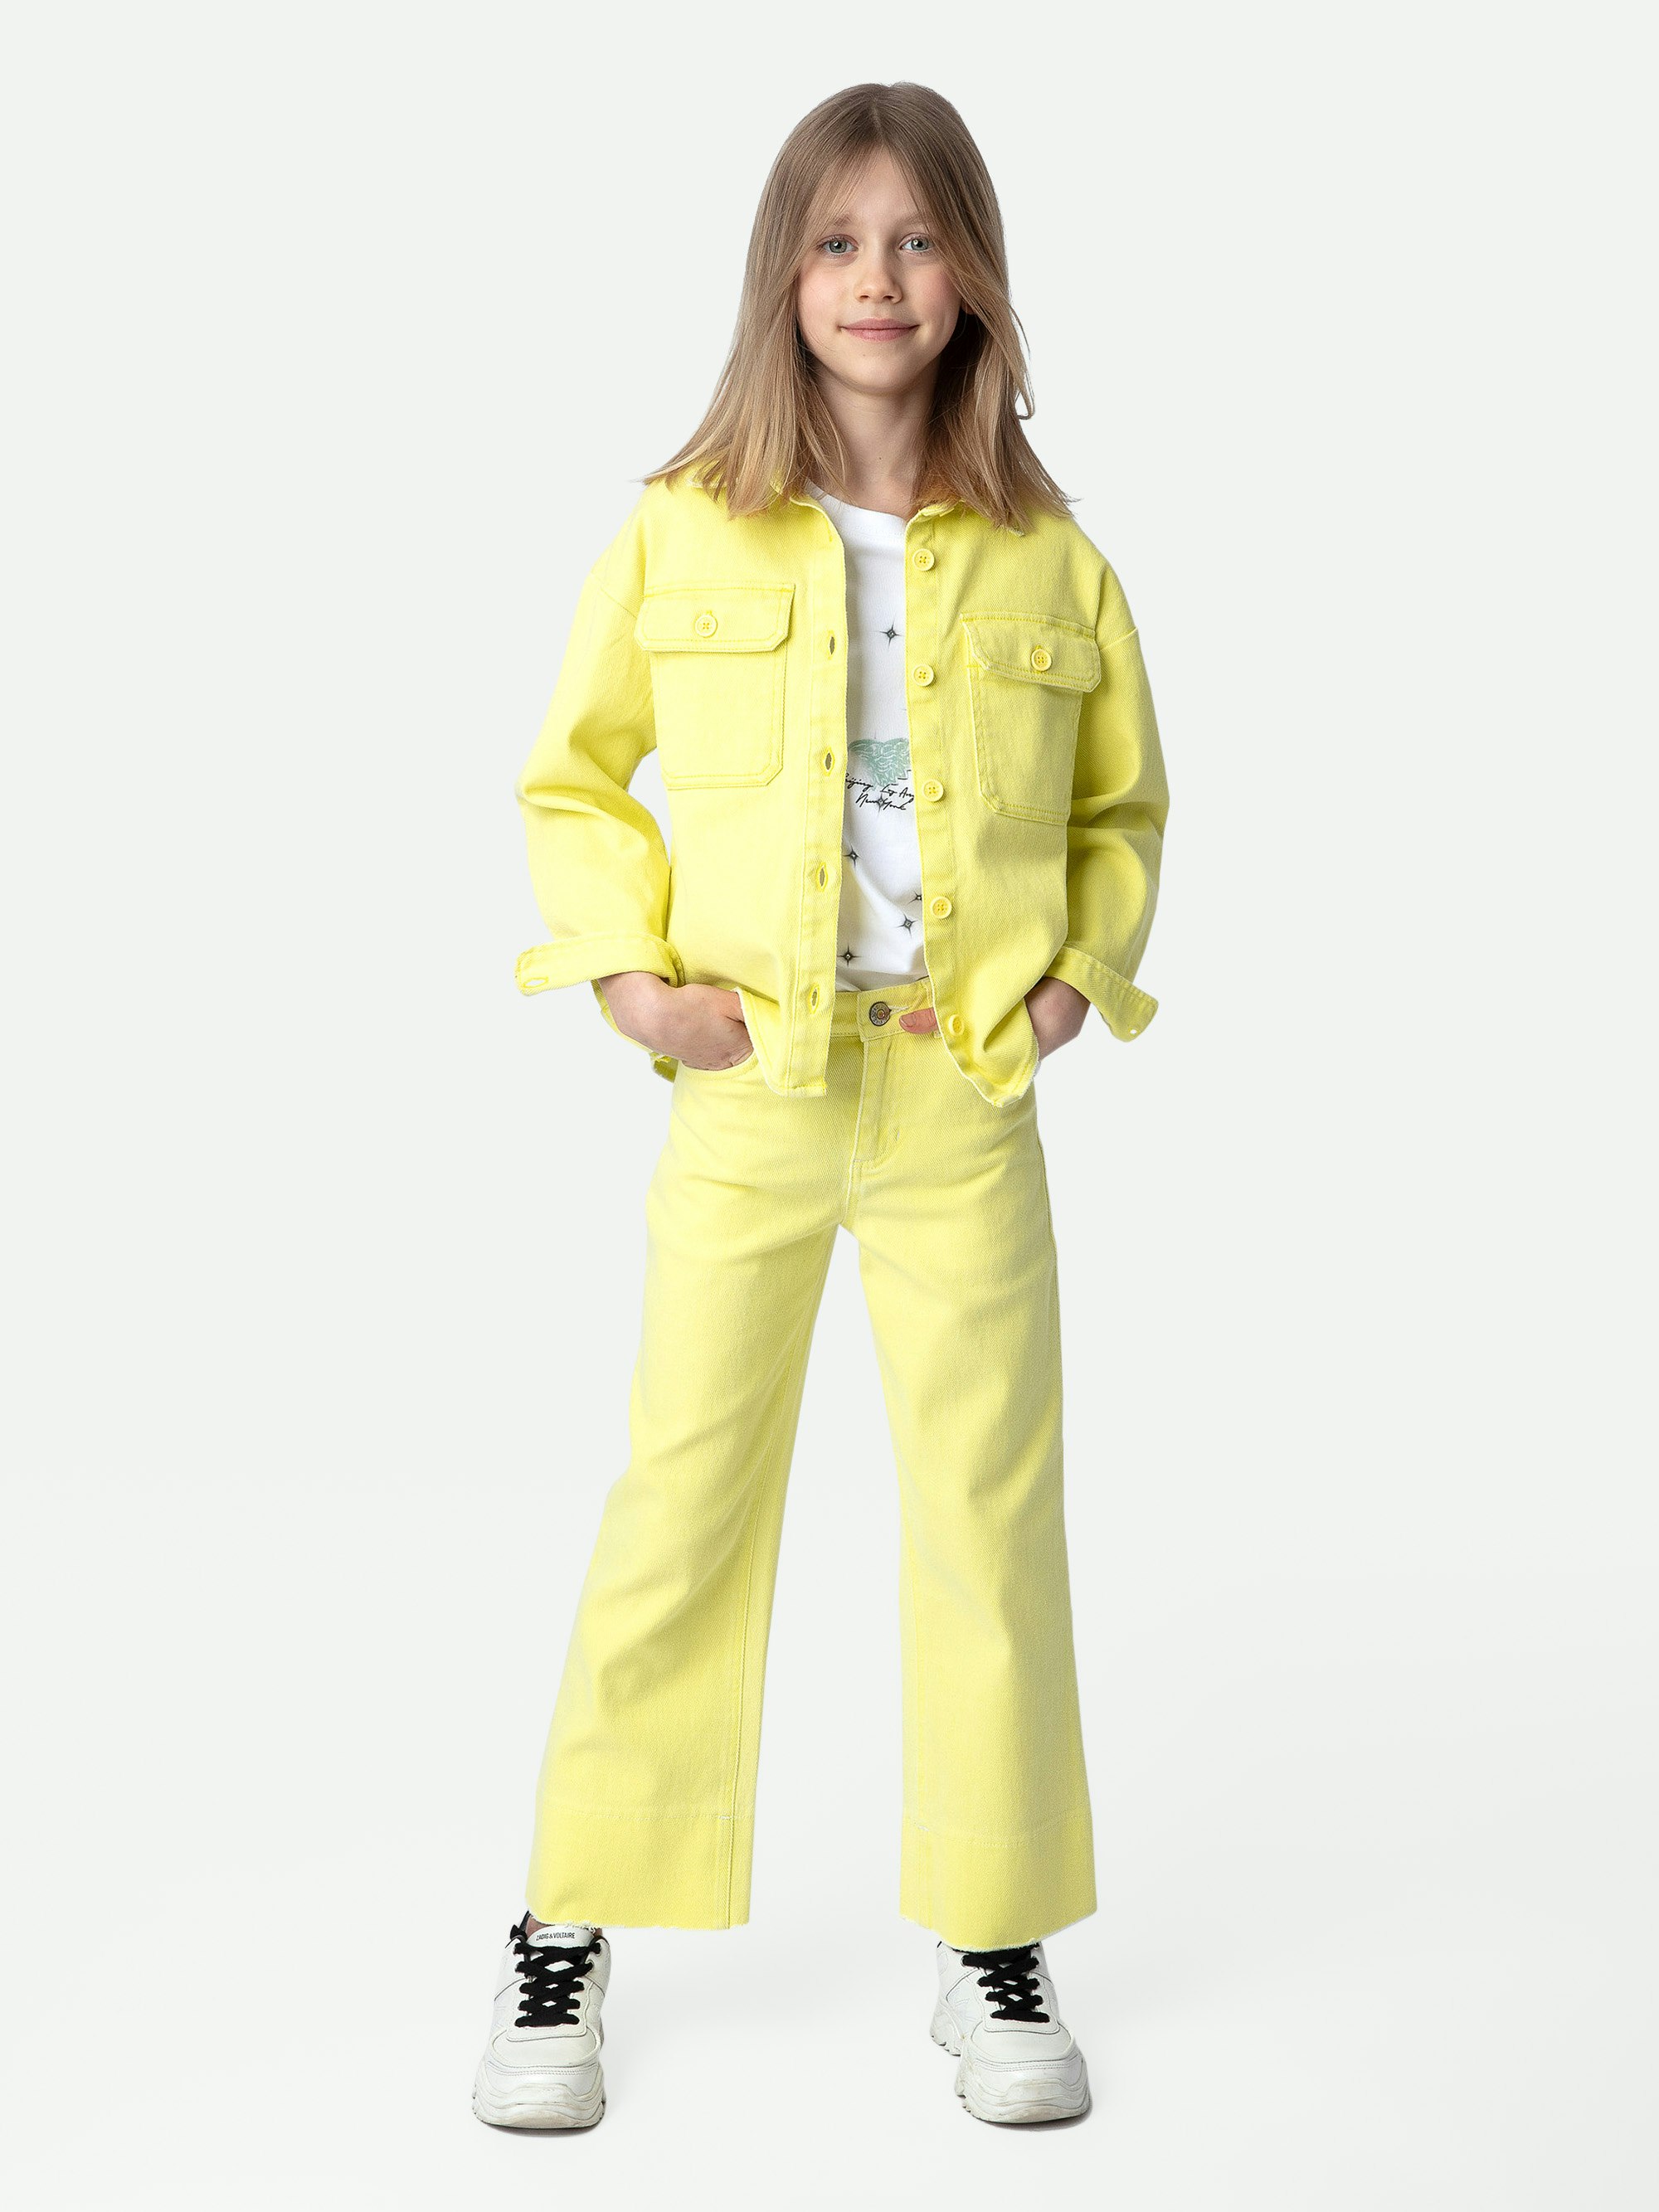 Timmy Girls’ Jacket - Girls’ yellow cotton twill jacket with “Amour” slogan on the back.